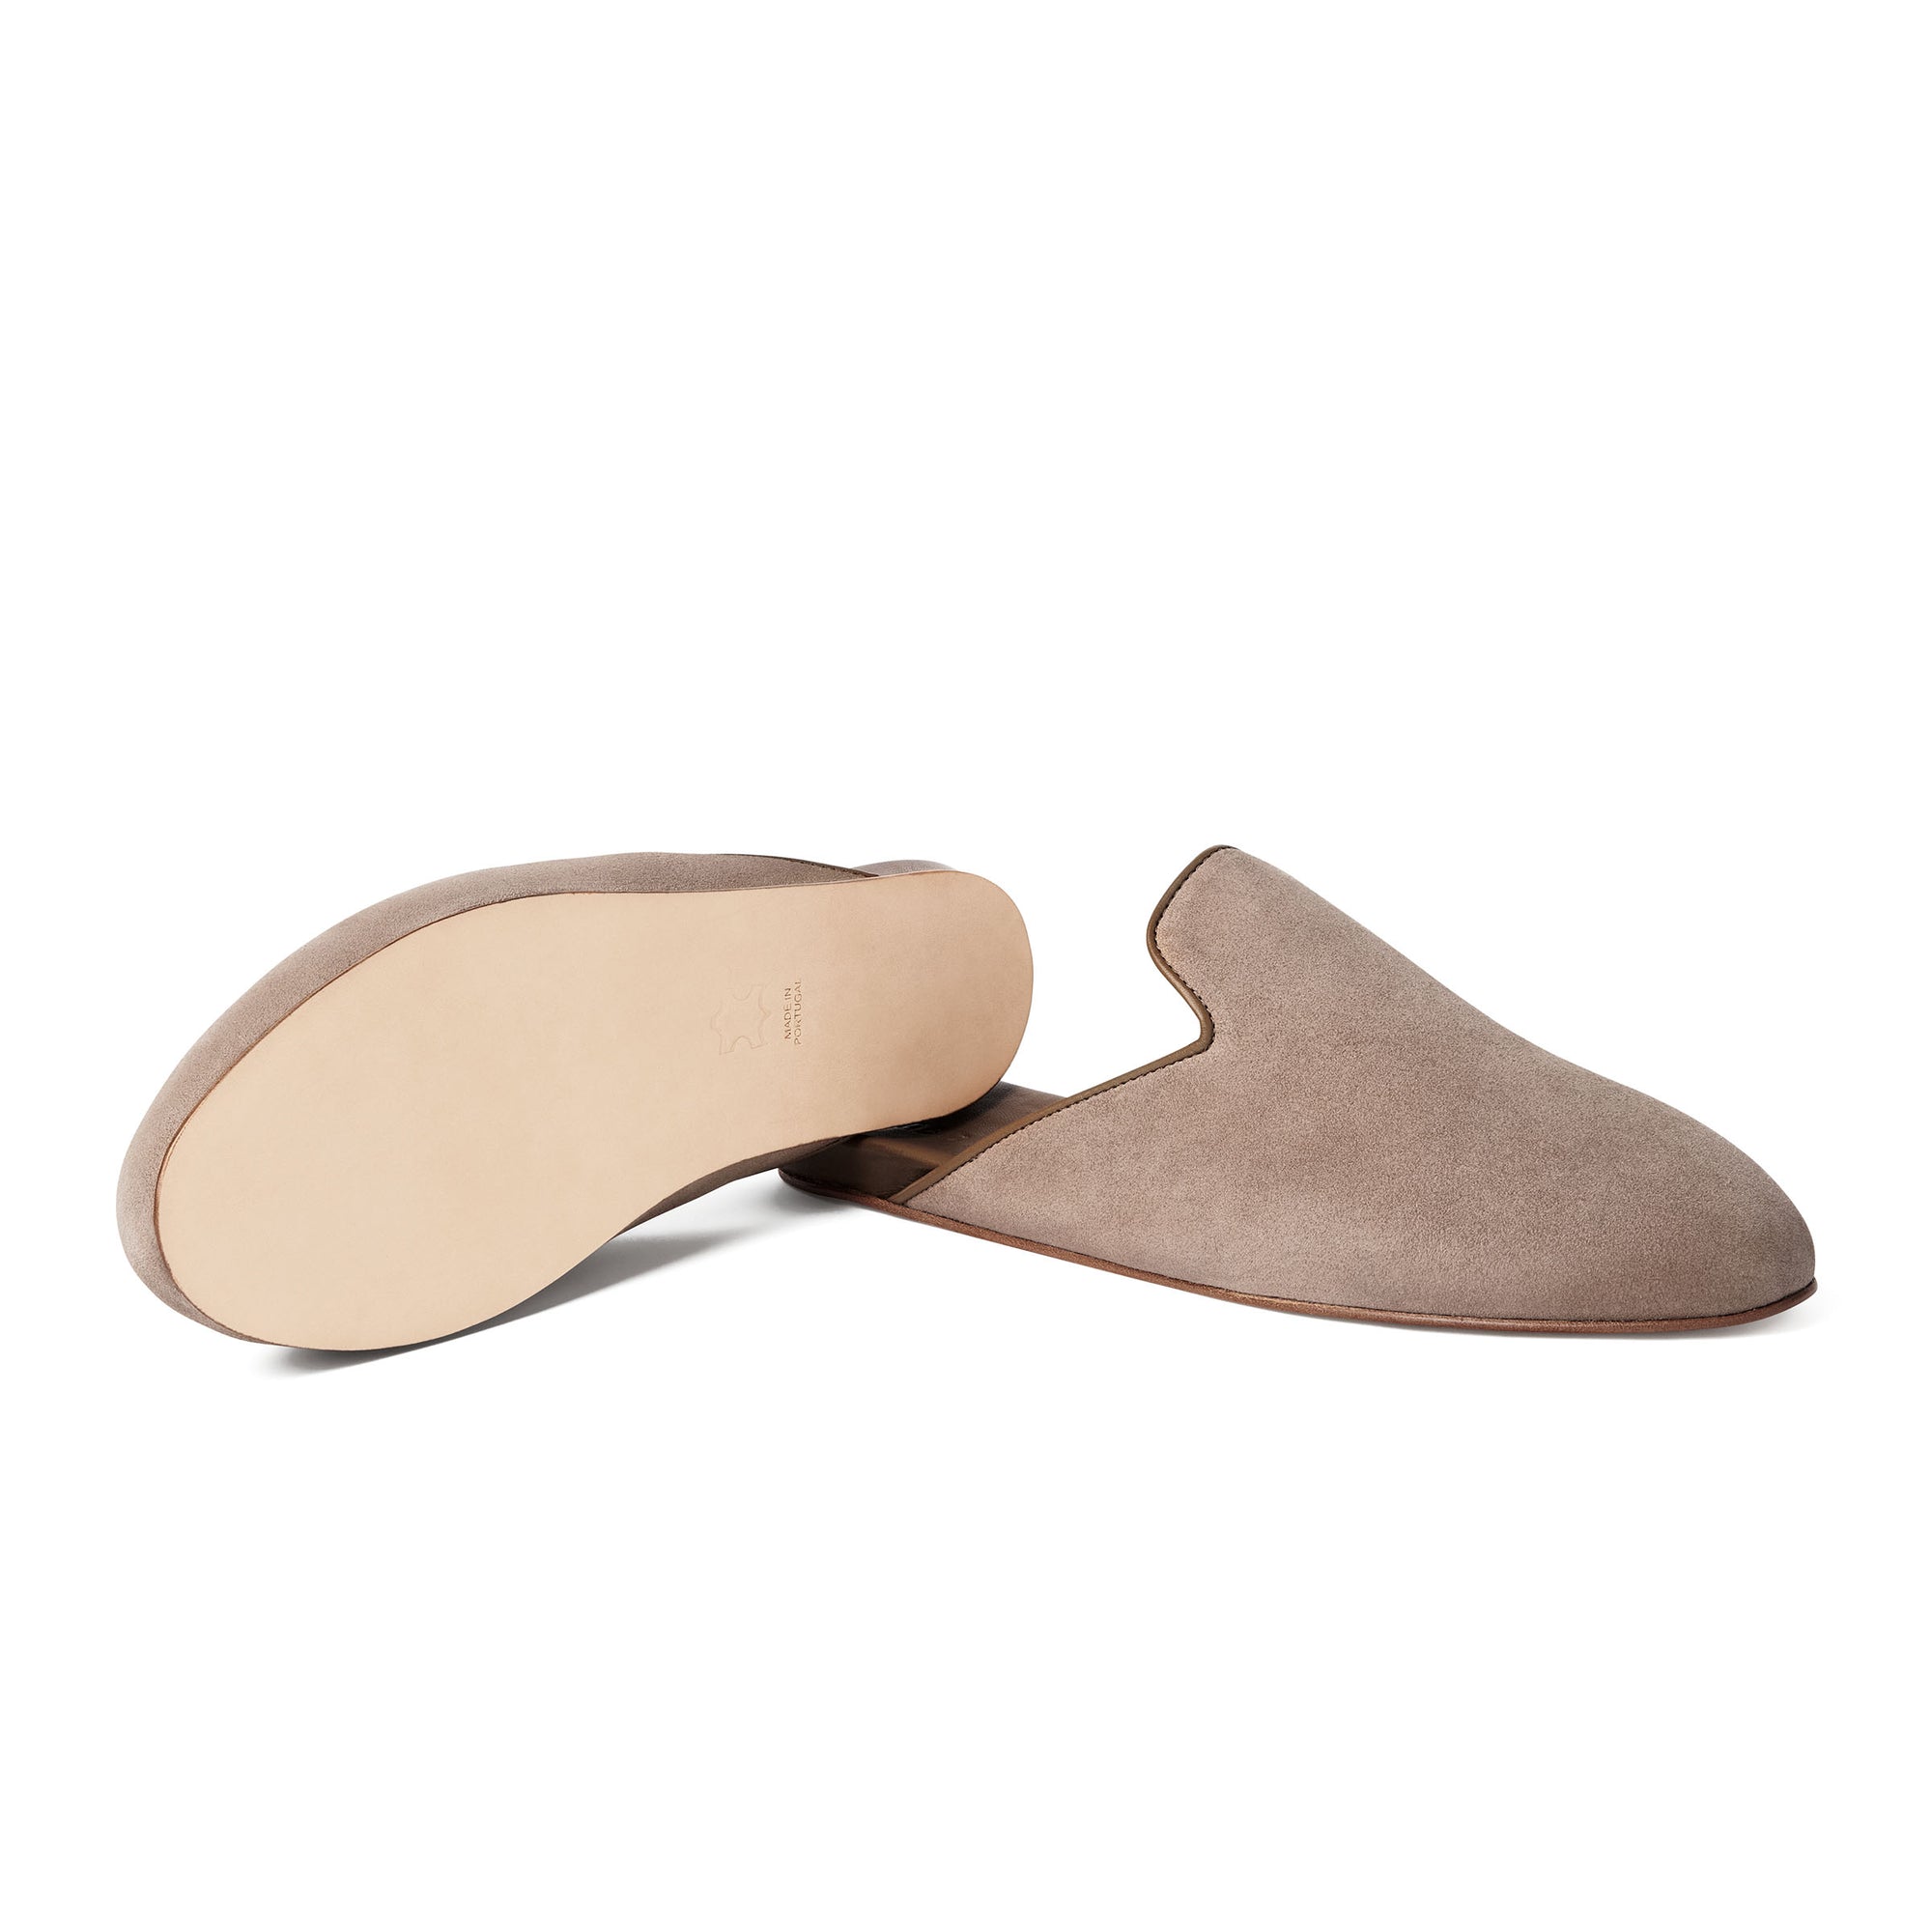 Leather Sole Slipper From Inabo